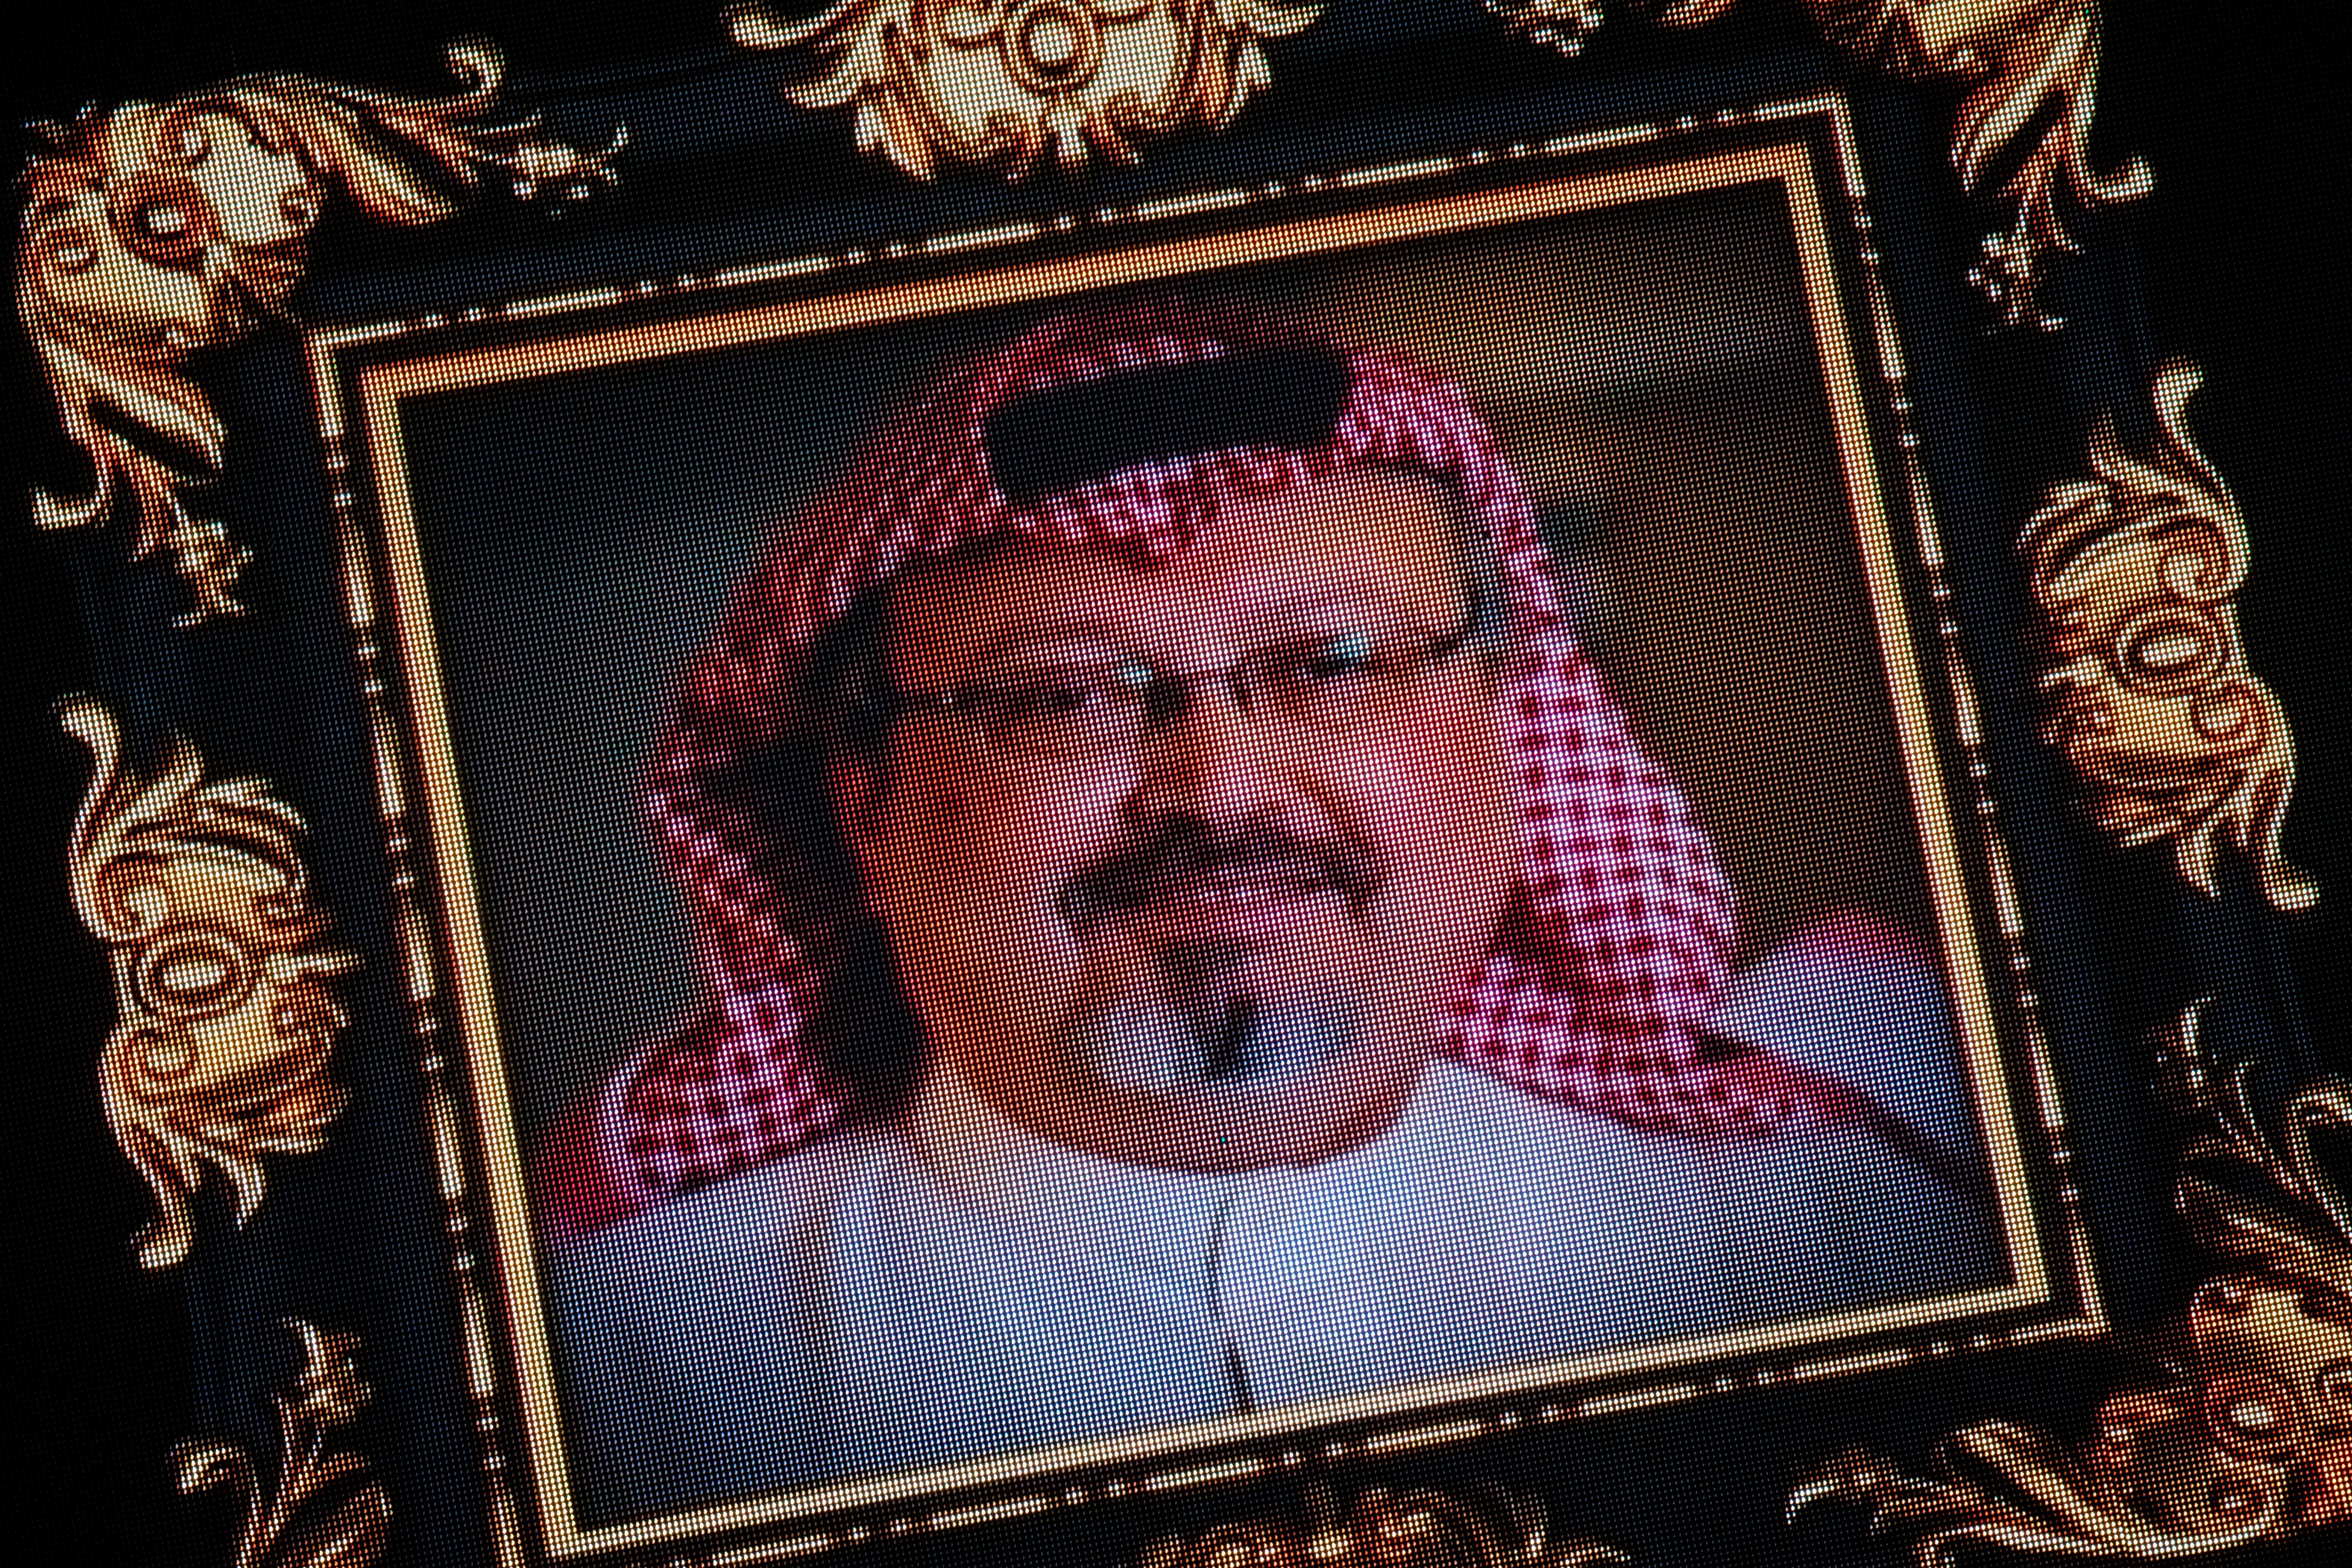 An image of Khashoggi in an ornate frame, projected on a screen.